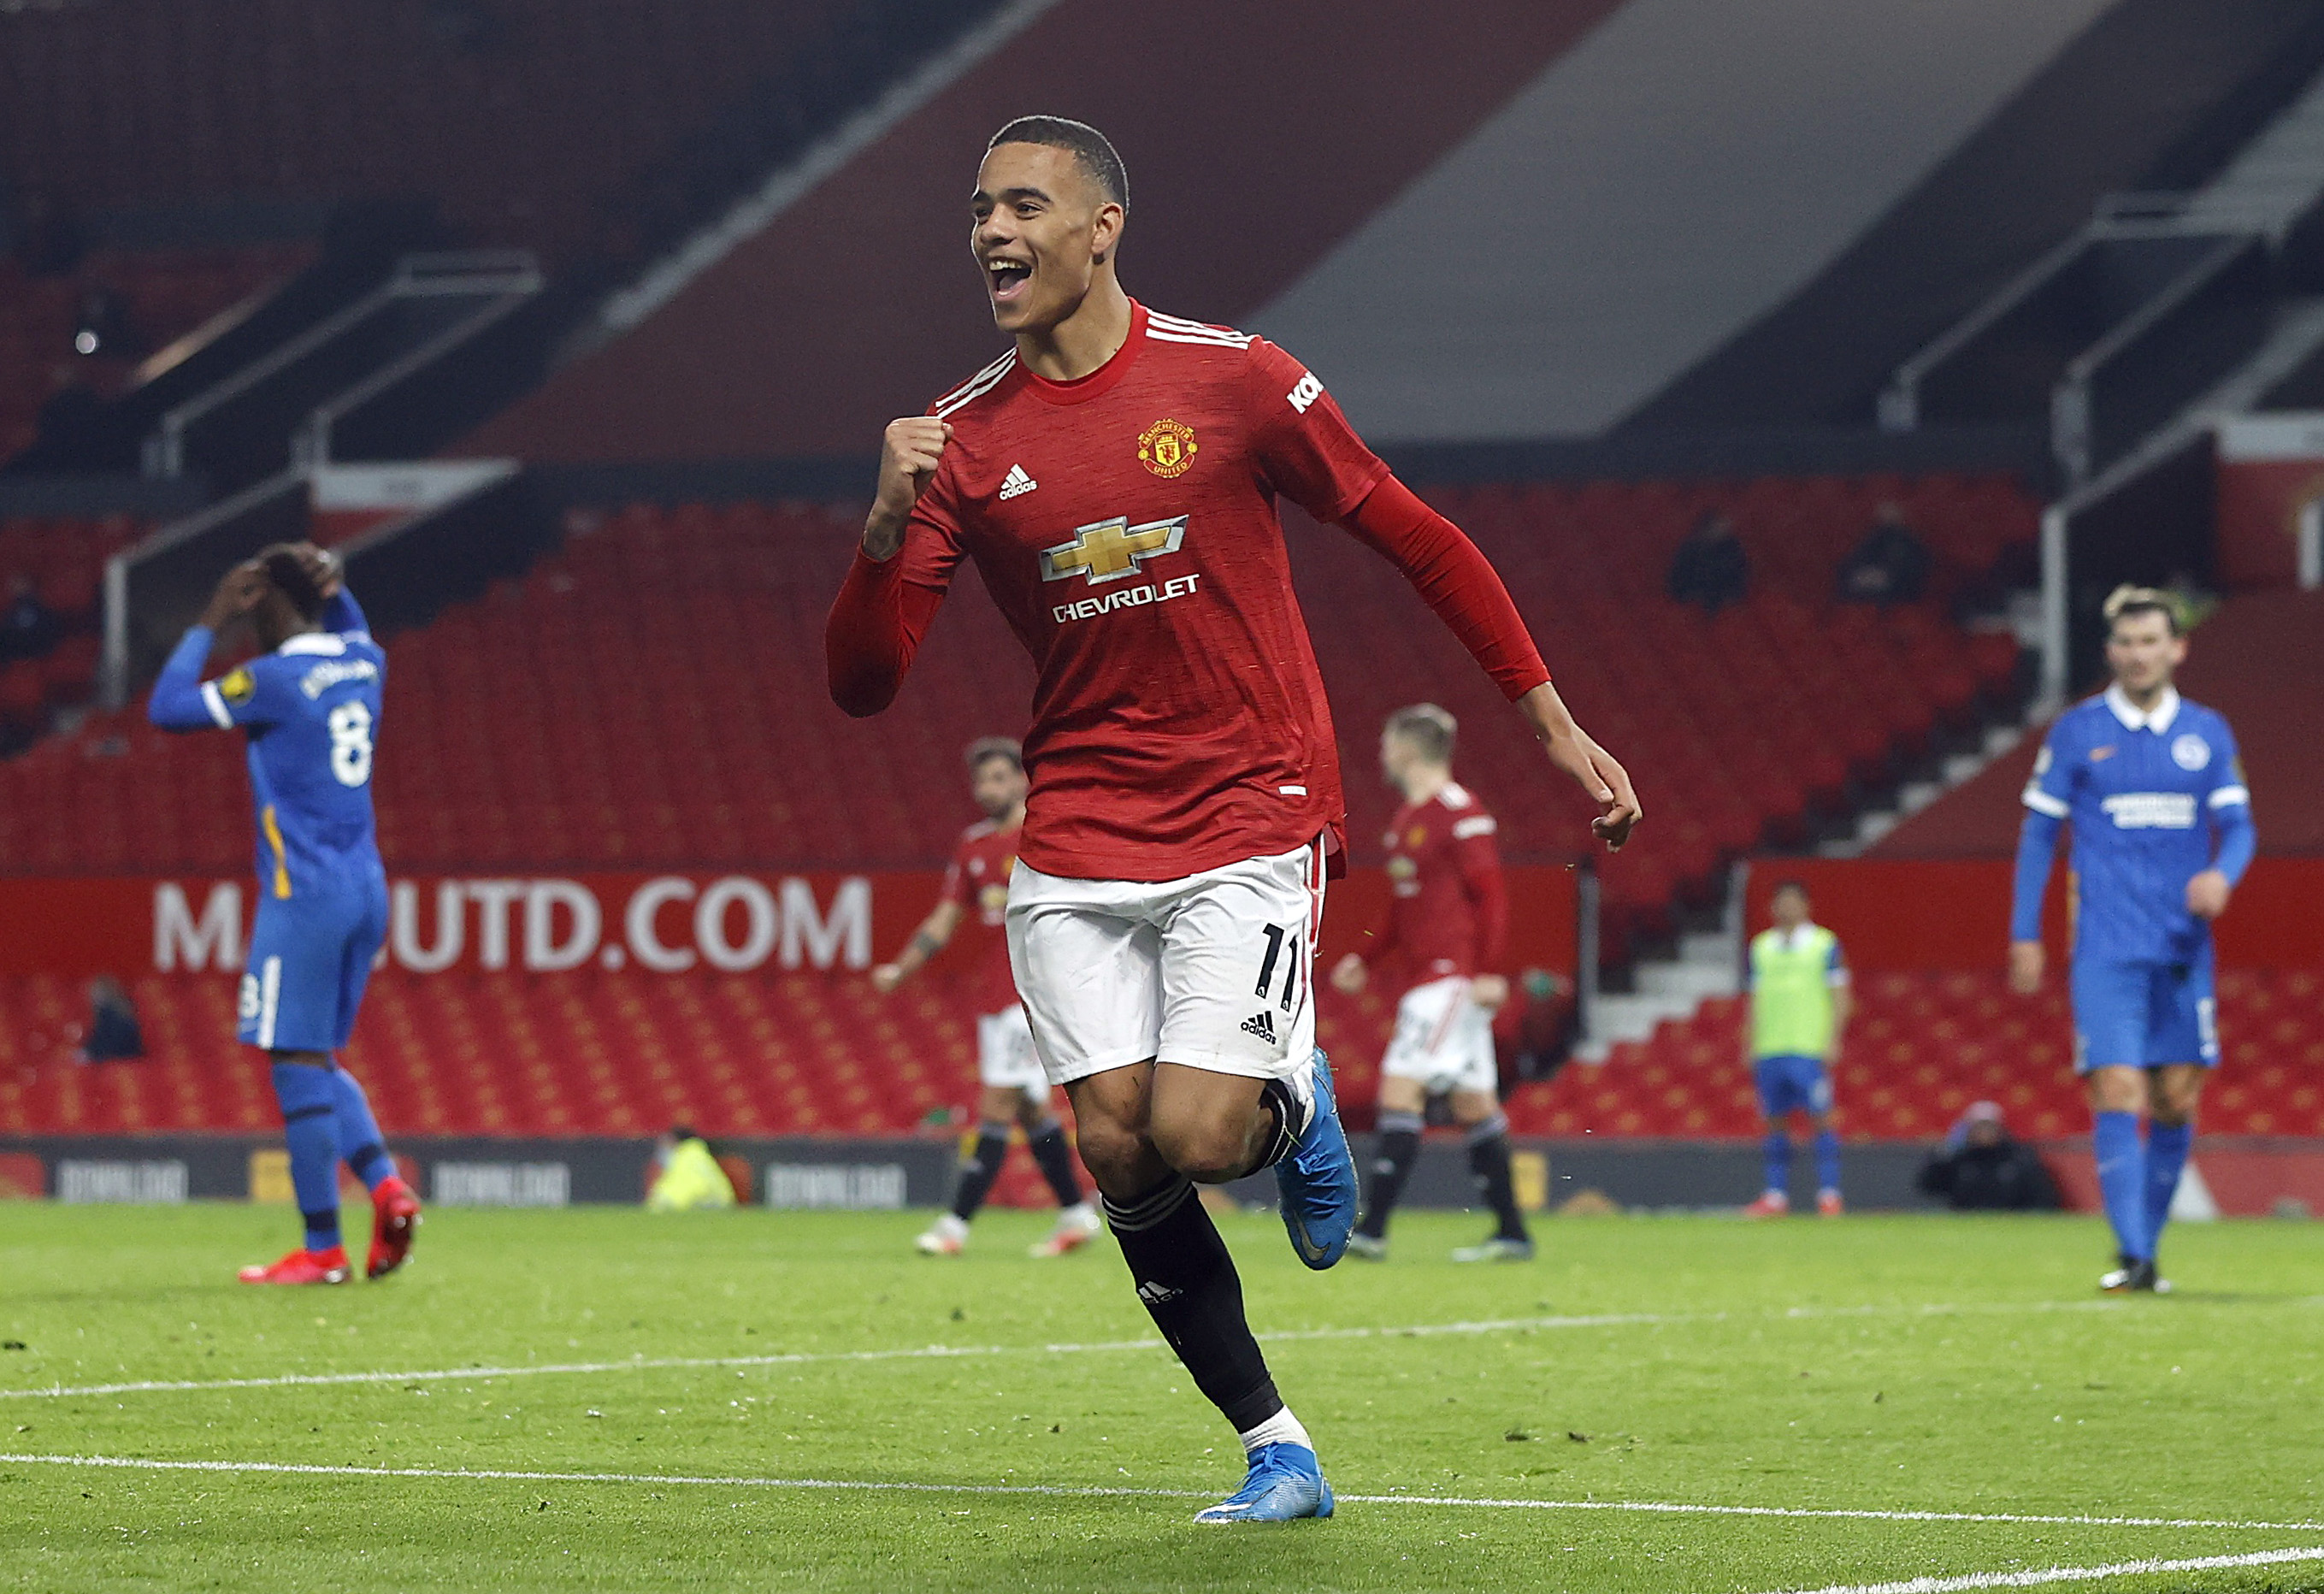 Soccer-Greenwood strikes as Man United recover to beat Brighton Reuters